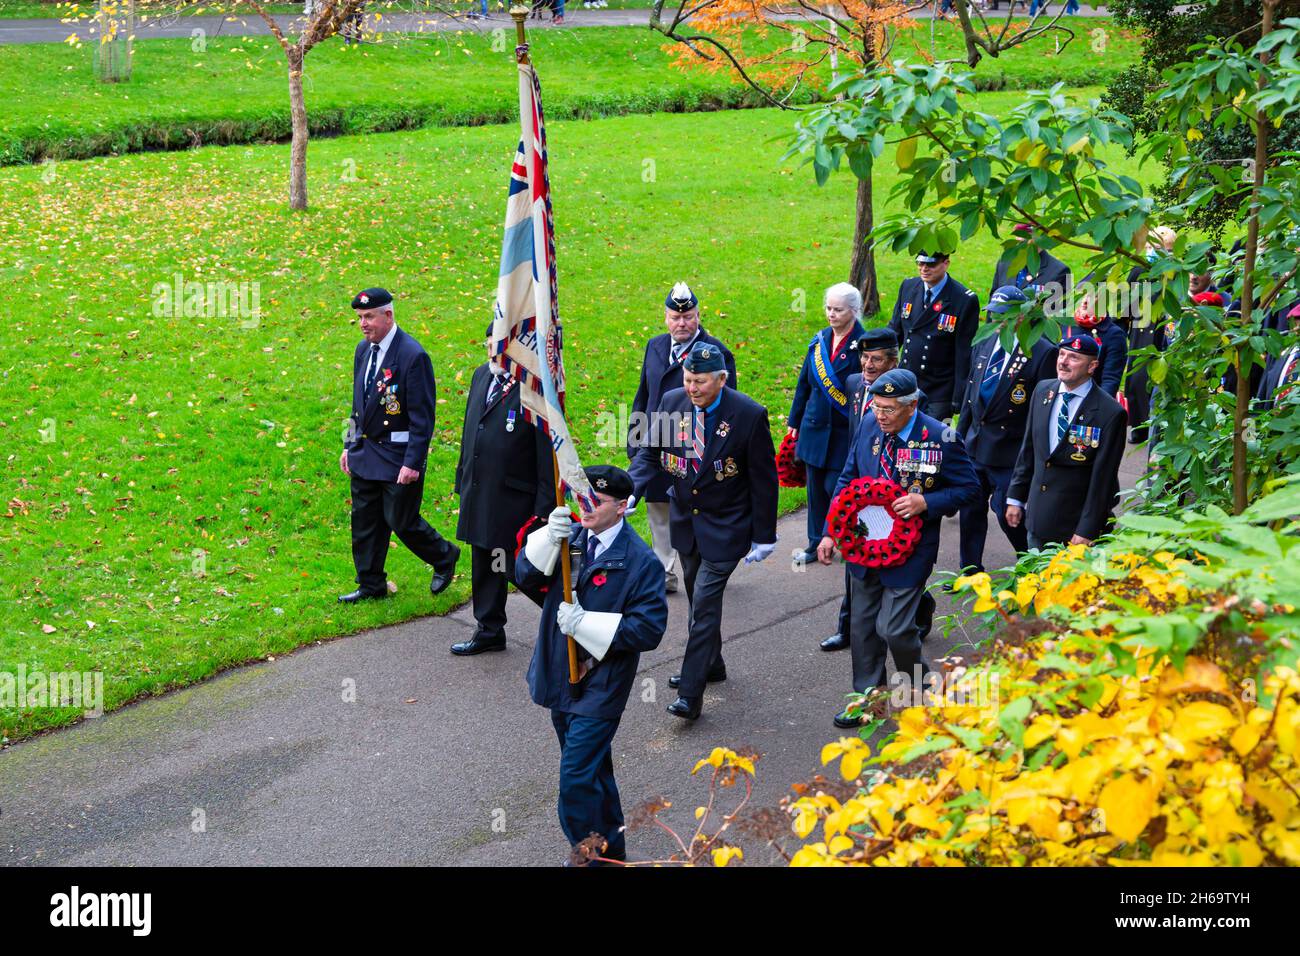 Bournemouth, Dorset UK. 14th November 2021. Remembrance Sunday Parade and wreath laying service - representatives of armed services, forces groups and cadets parade through Bournemouth gardens followed by a service and wreath laying at the War Memorial in Central Gardens. Crowds gather to pay their respects and remember the fallen on a mild day. This year coincides with the centenary year of the Royal British Legion. Veterans march through the garden. Credit: Carolyn Jenkins/Alamy Live News Stock Photo